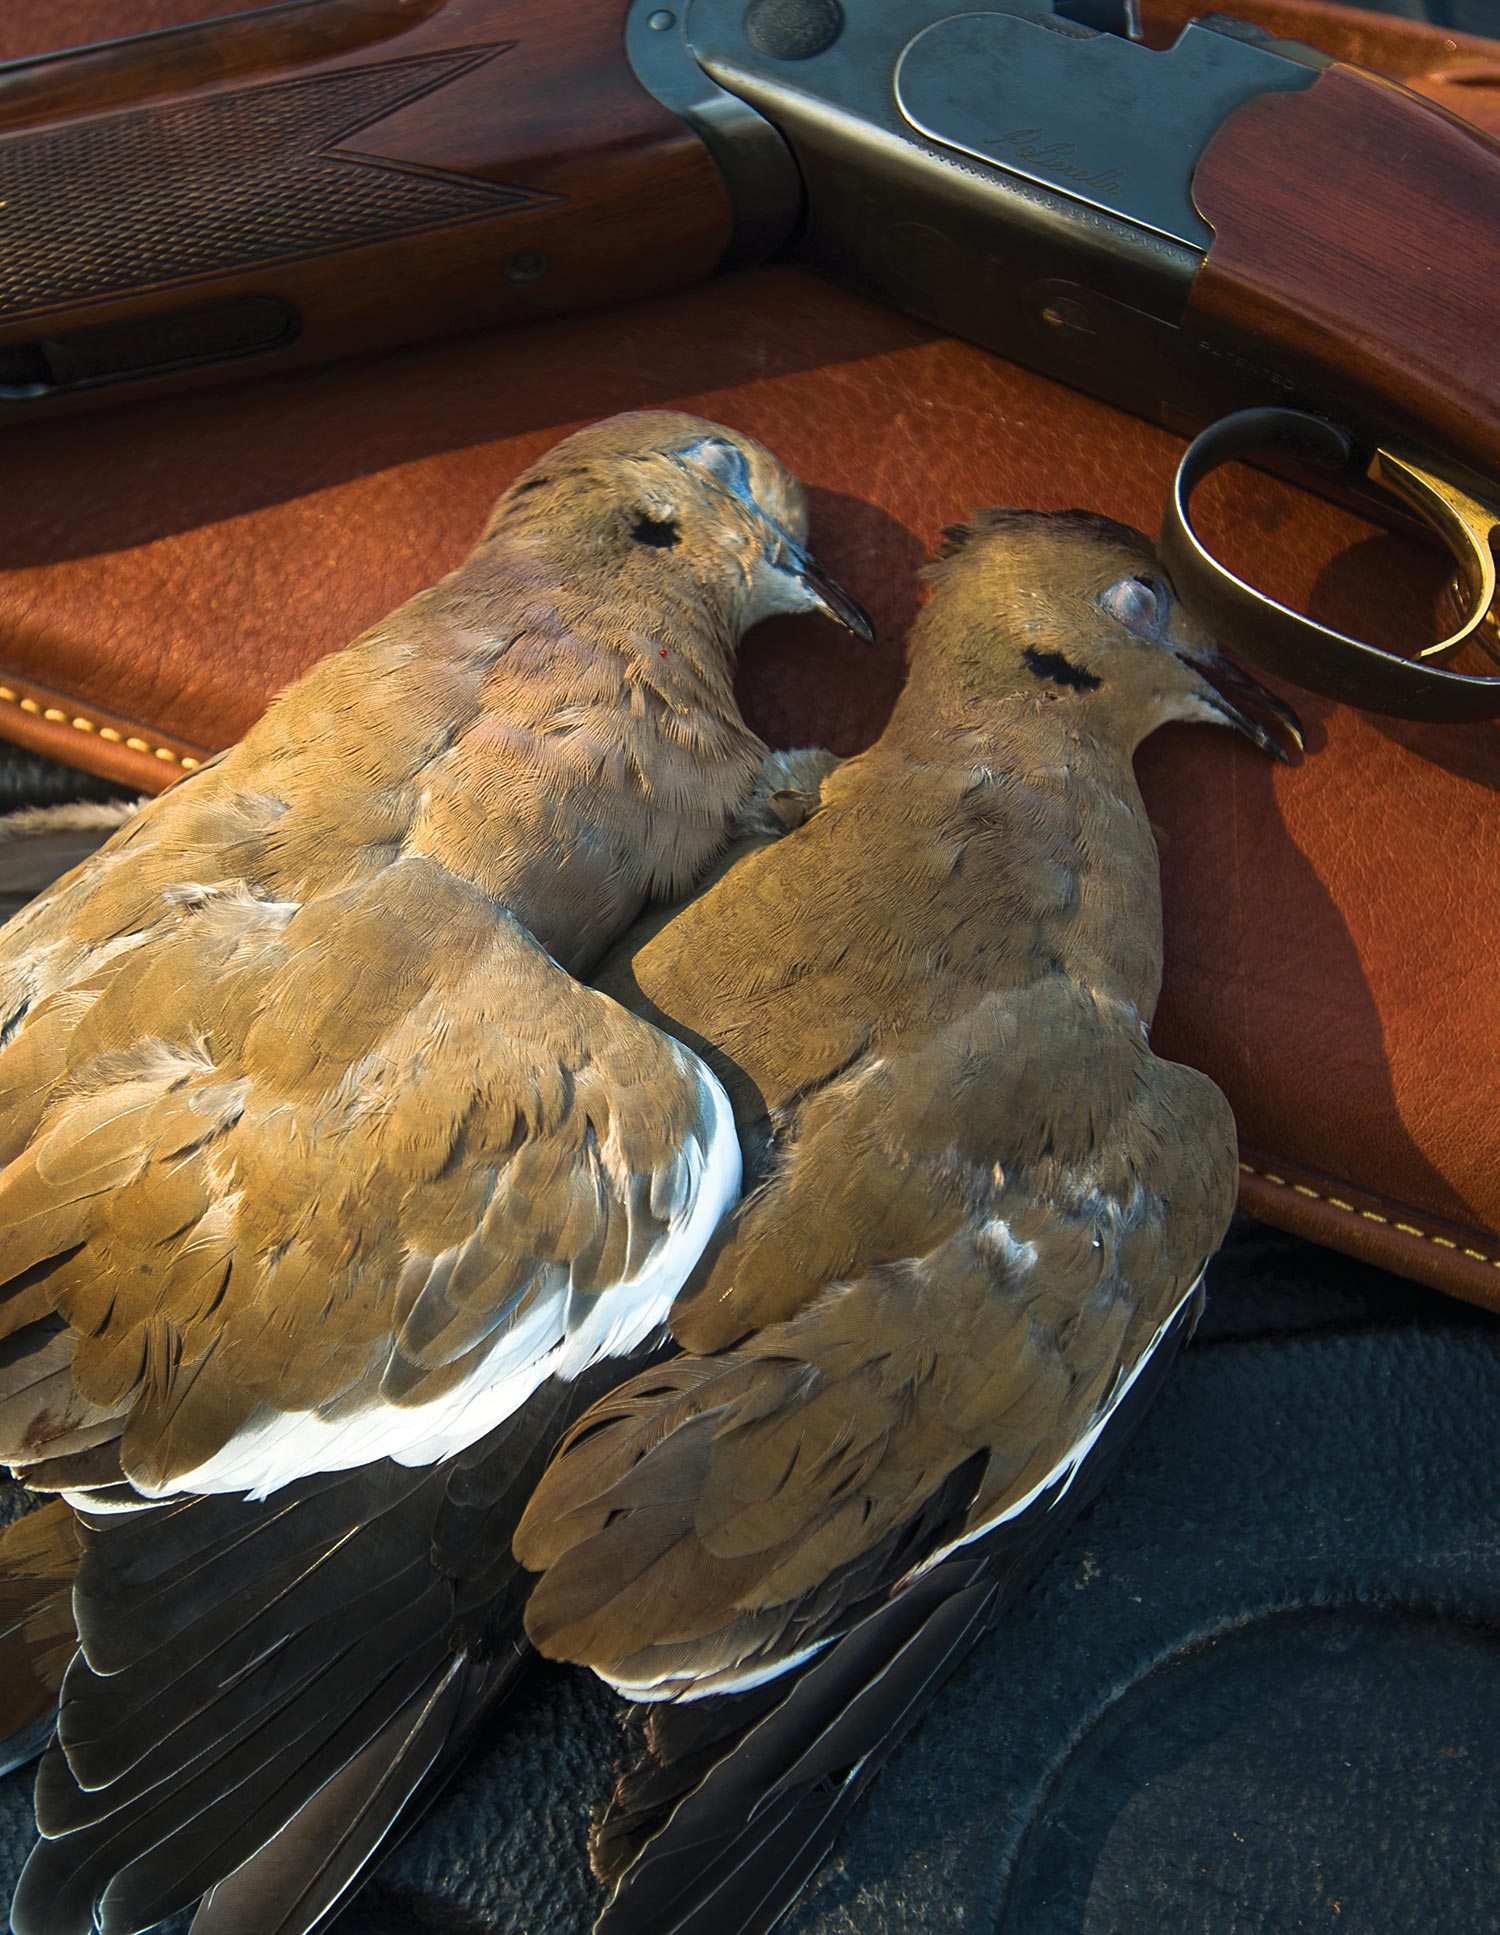 two doves laid atop leather gun case, with broken shotgun nearby